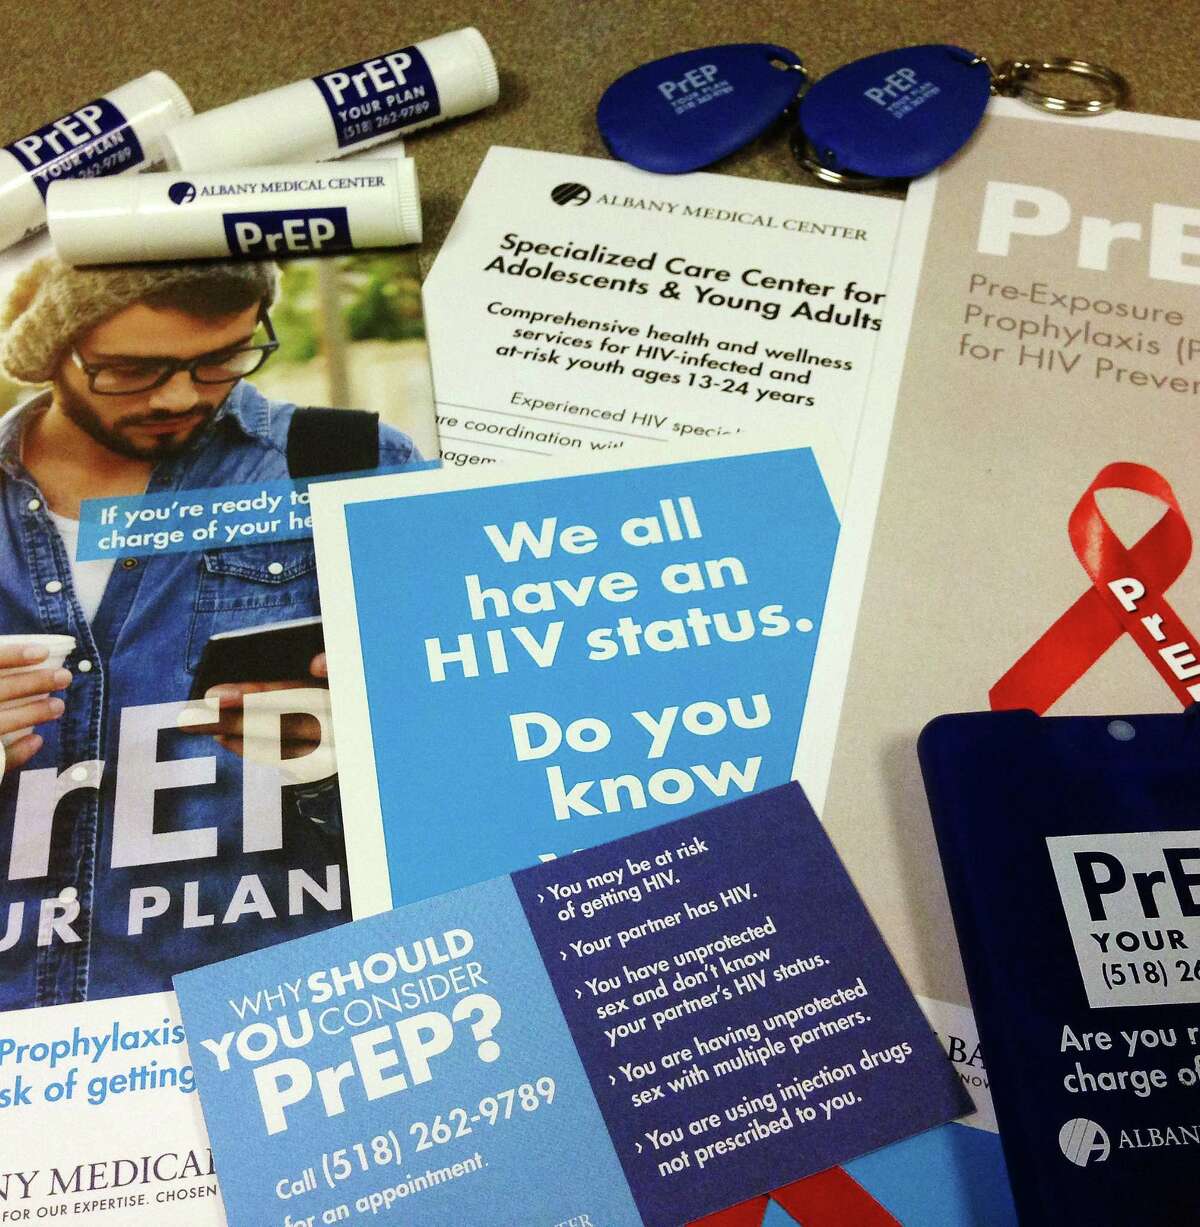 Treatment of HIV has come a long way since the start of the epidemic. PrEP (pre-exposure prophylaxis) is a once daily pill regimen that is nearly 99 percent effective at preventing HIV transmission.